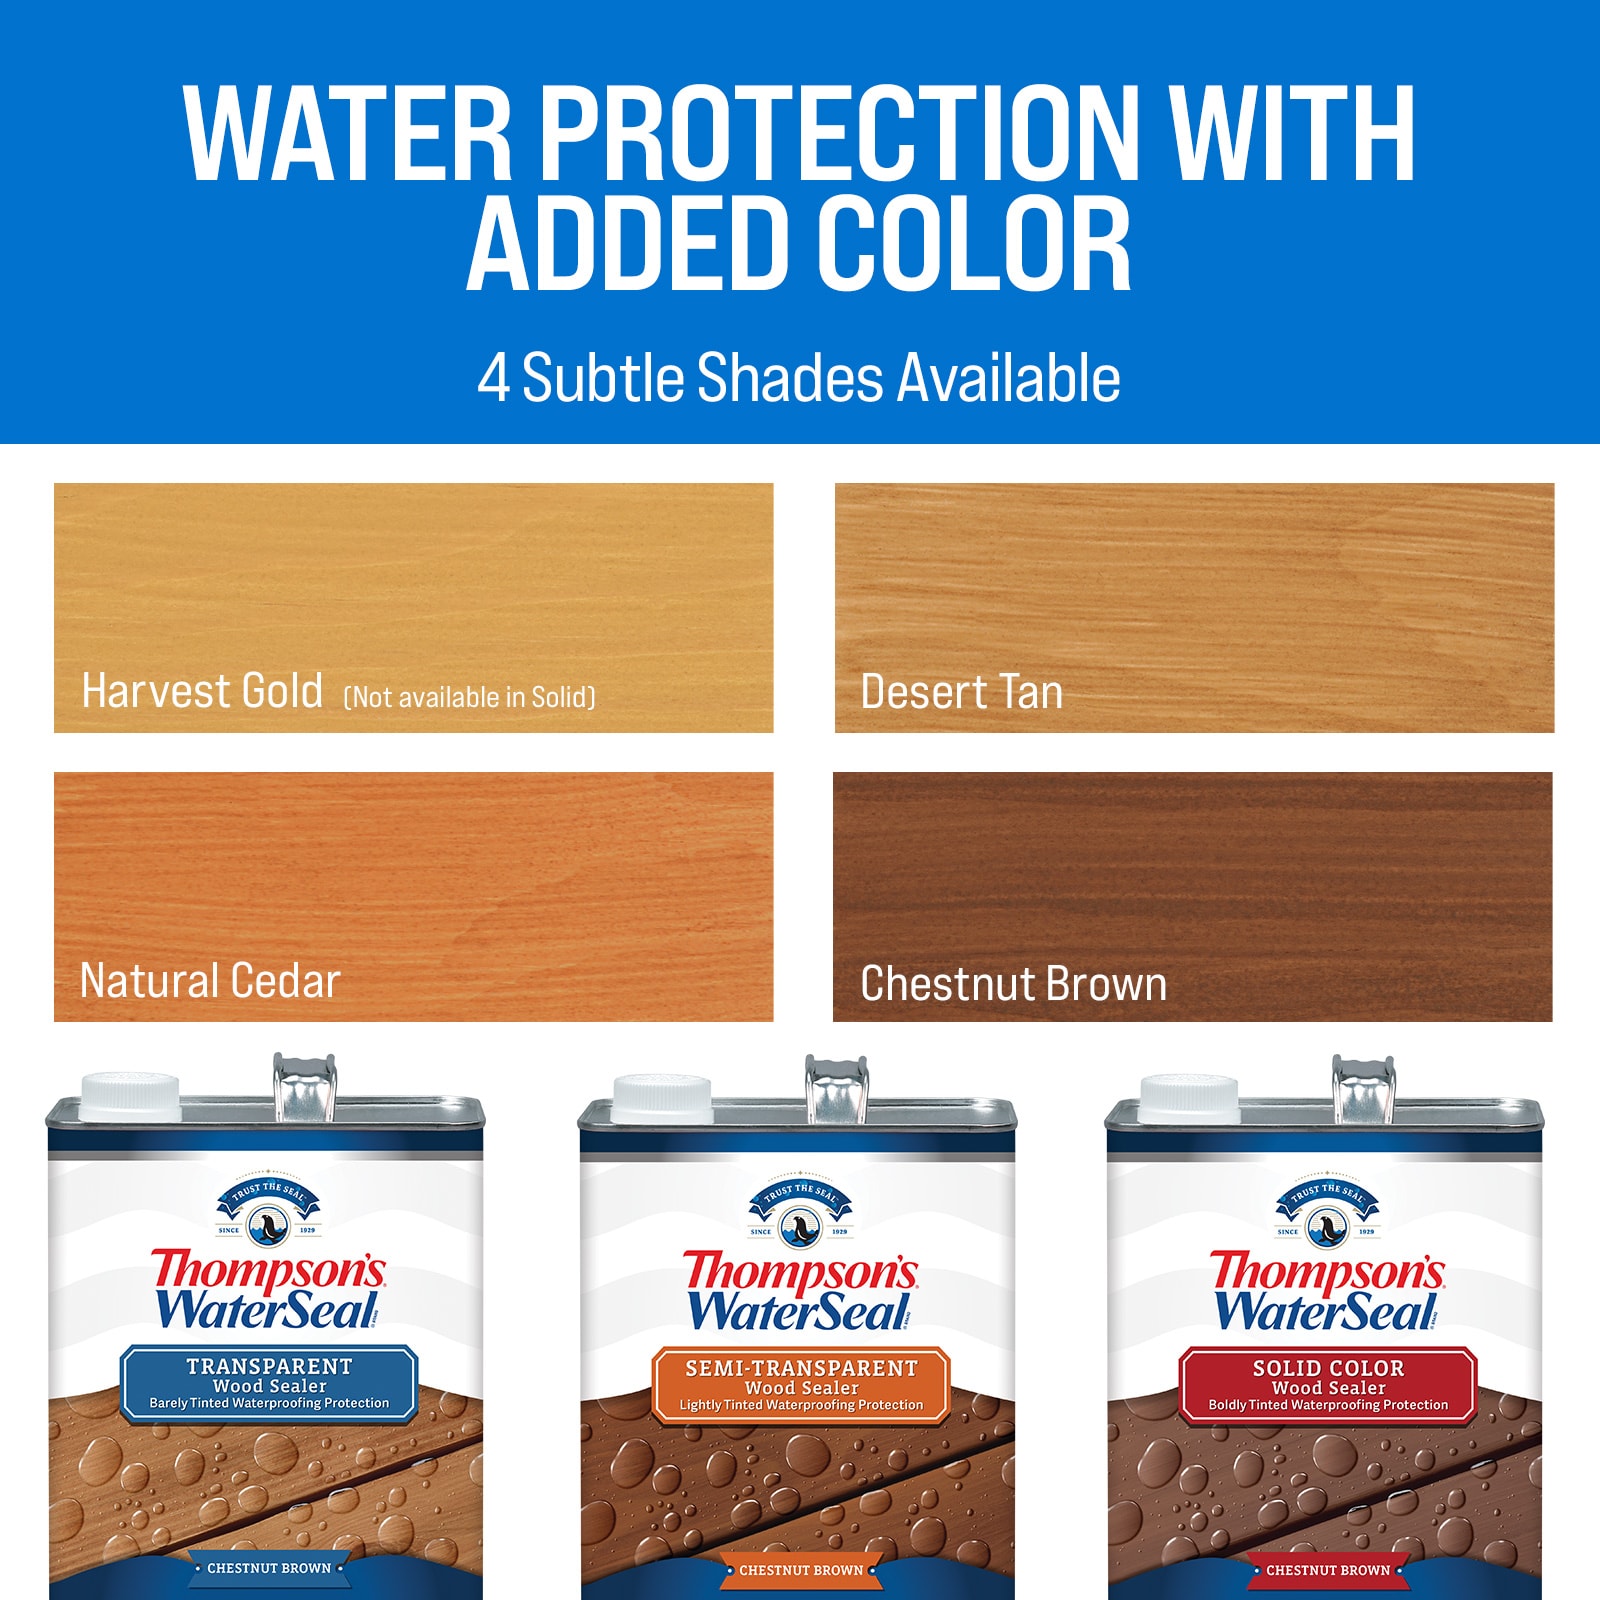 Thompson's WaterSeal Semi-Transparent Waterproofing Wood Stain and Sealer,  Chestnut Brown, 1 Gallon 